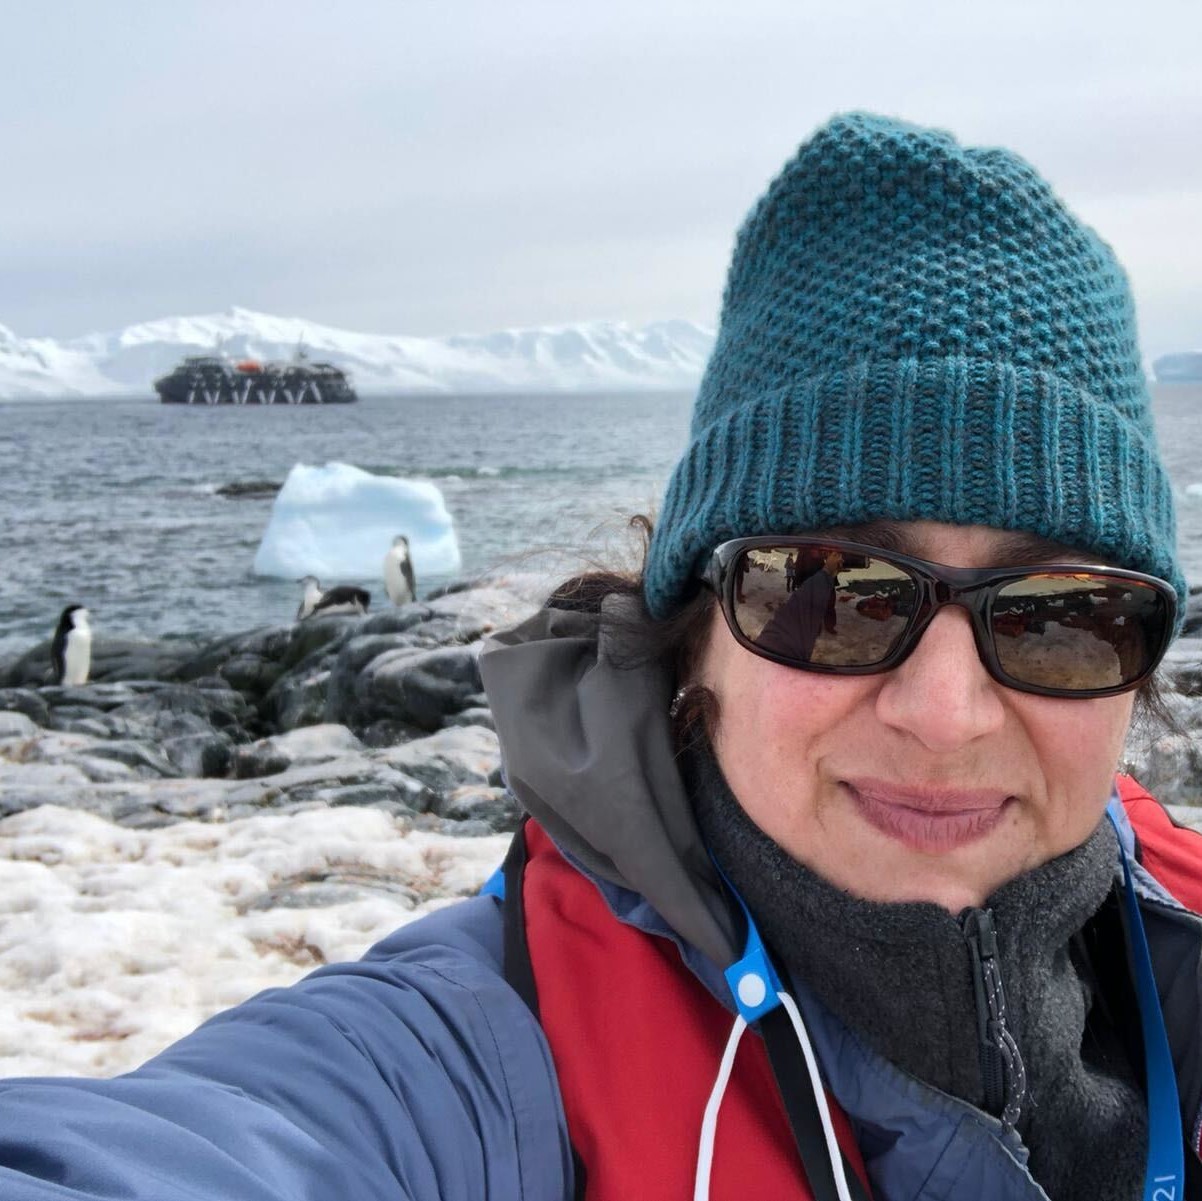 A woman is taking a selfie in front of a group of penguins during her adventure travel.